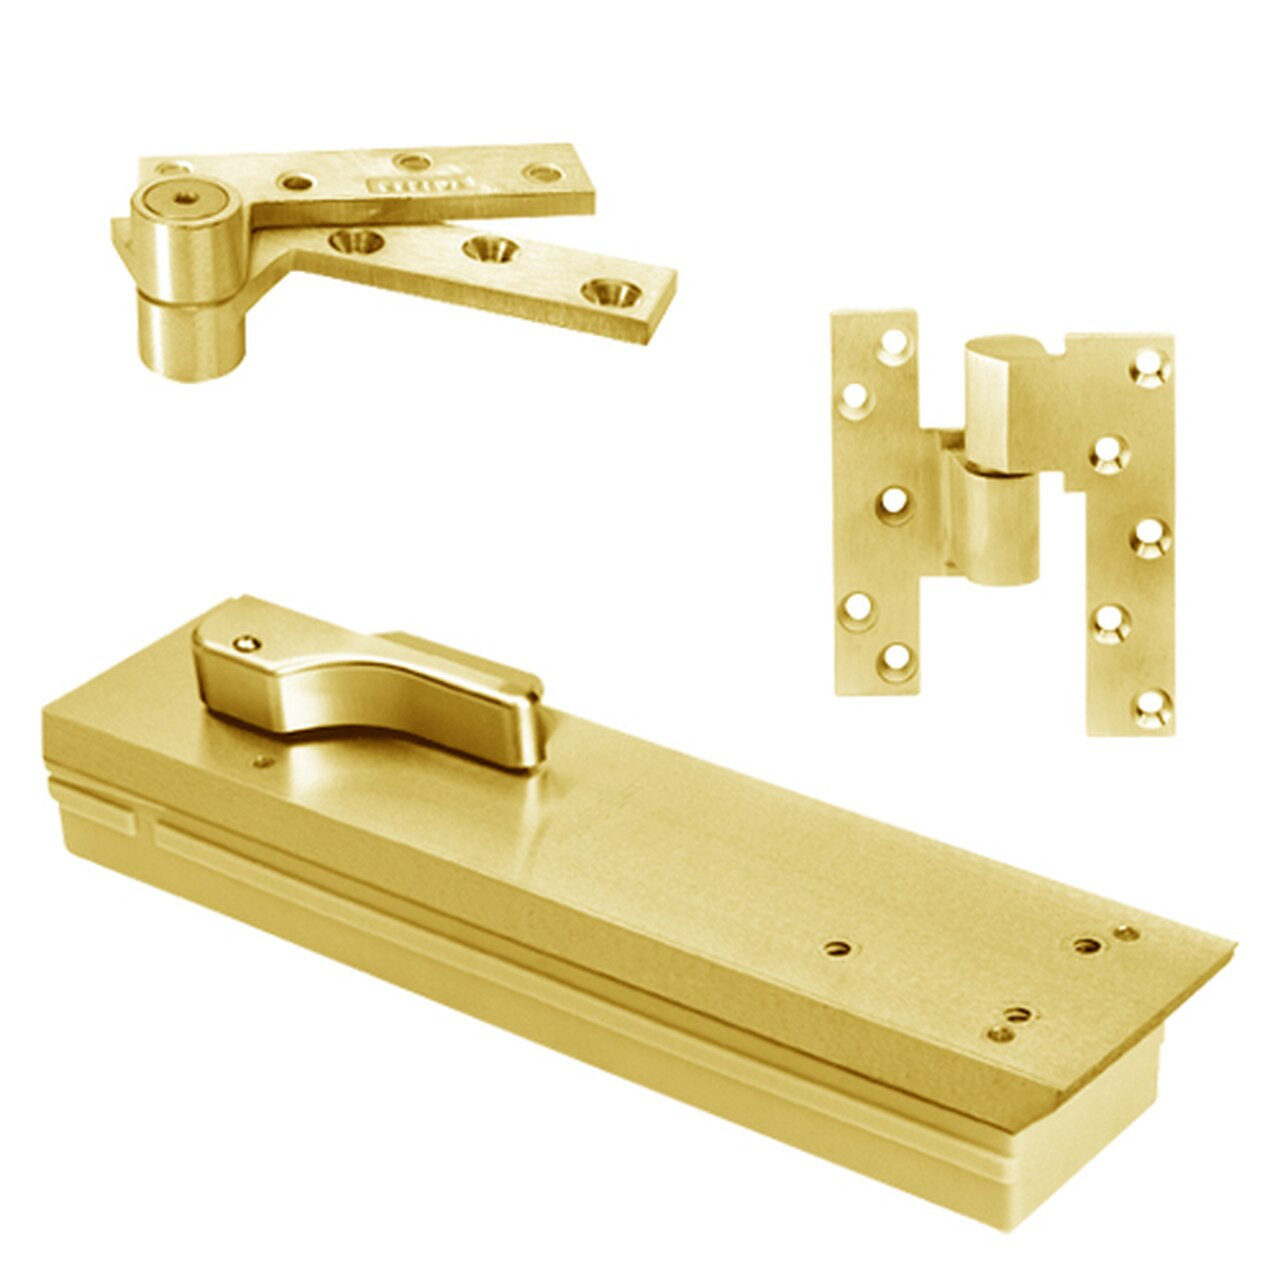 FQ5104NBC-LCC-LH-605 Rixson Q51 Series Fire Rated 3/4" Offset Hung Shallow Depth Floor Closers in Bright Brass Finish